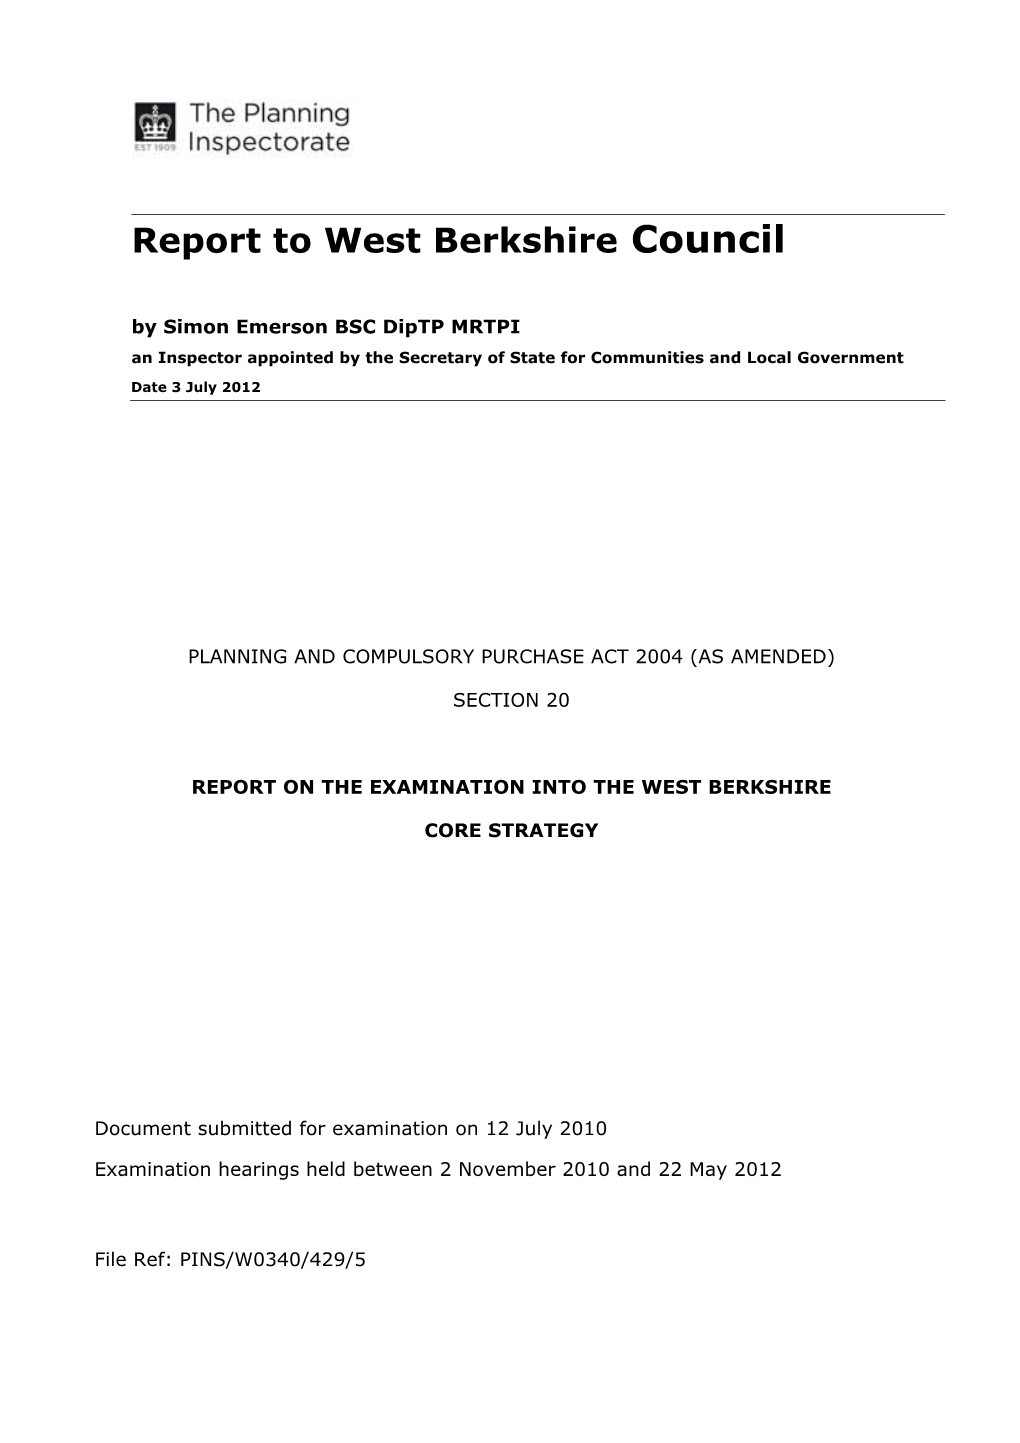 Report on Examination Into West Berkshire Core Strategy